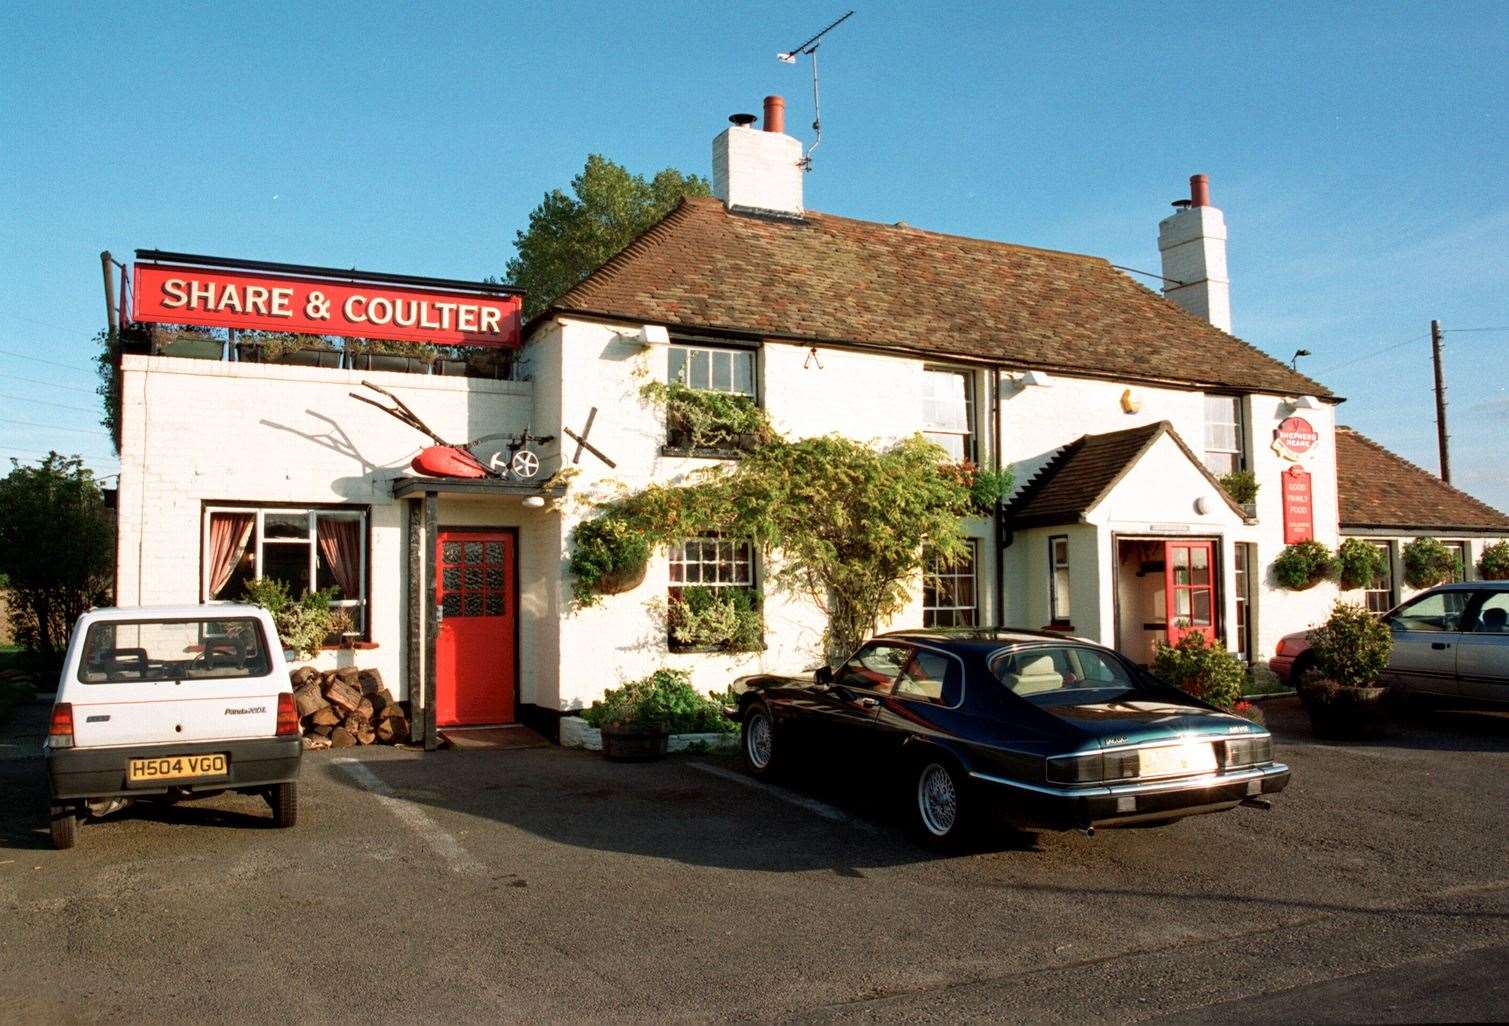 The Share and Coulter pub pictured in 2001